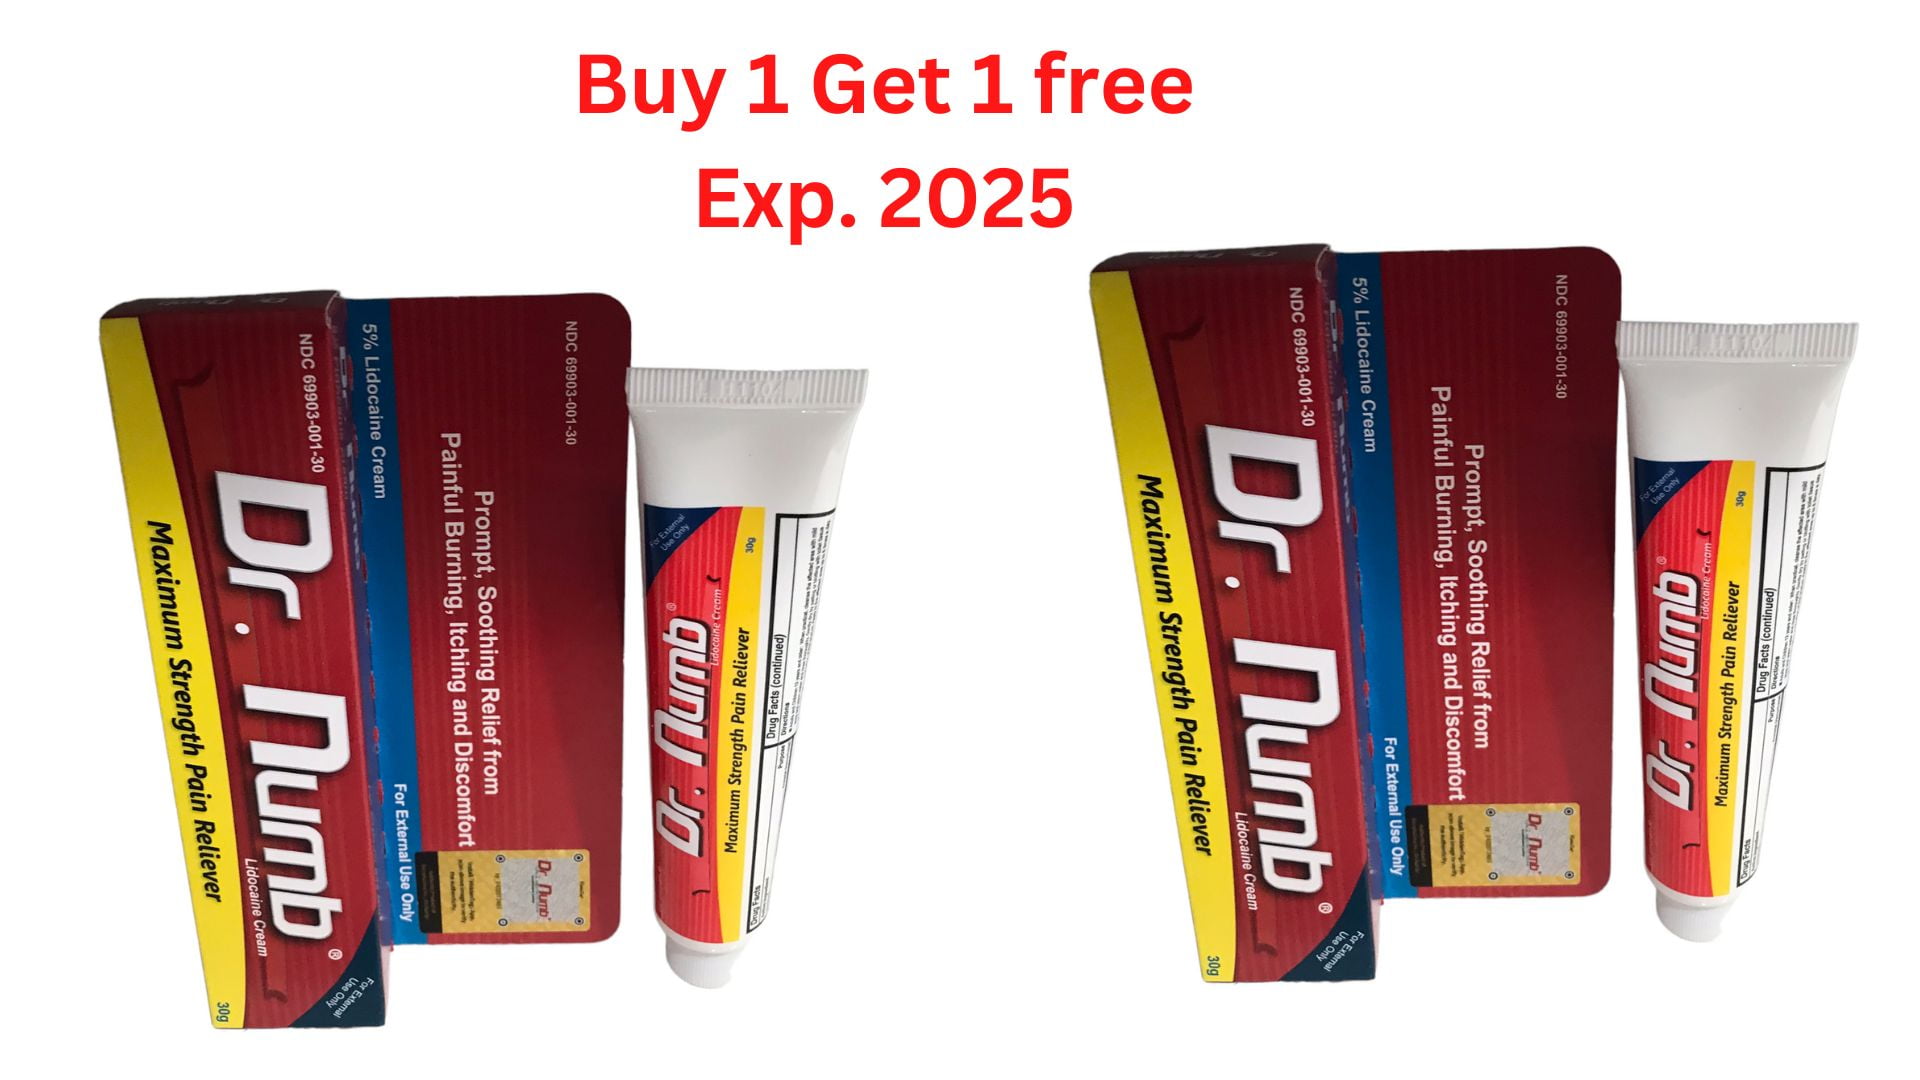 DR NUMB 30g Numbing Anesthetic Skin 5 Lidocaine Cream for Tattoo Piercing  Laser Waxing  Amazon price tracker  tracking Amazon price history  charts Amazon price watches Amazon price drop alerts  camelcamelcamelcom